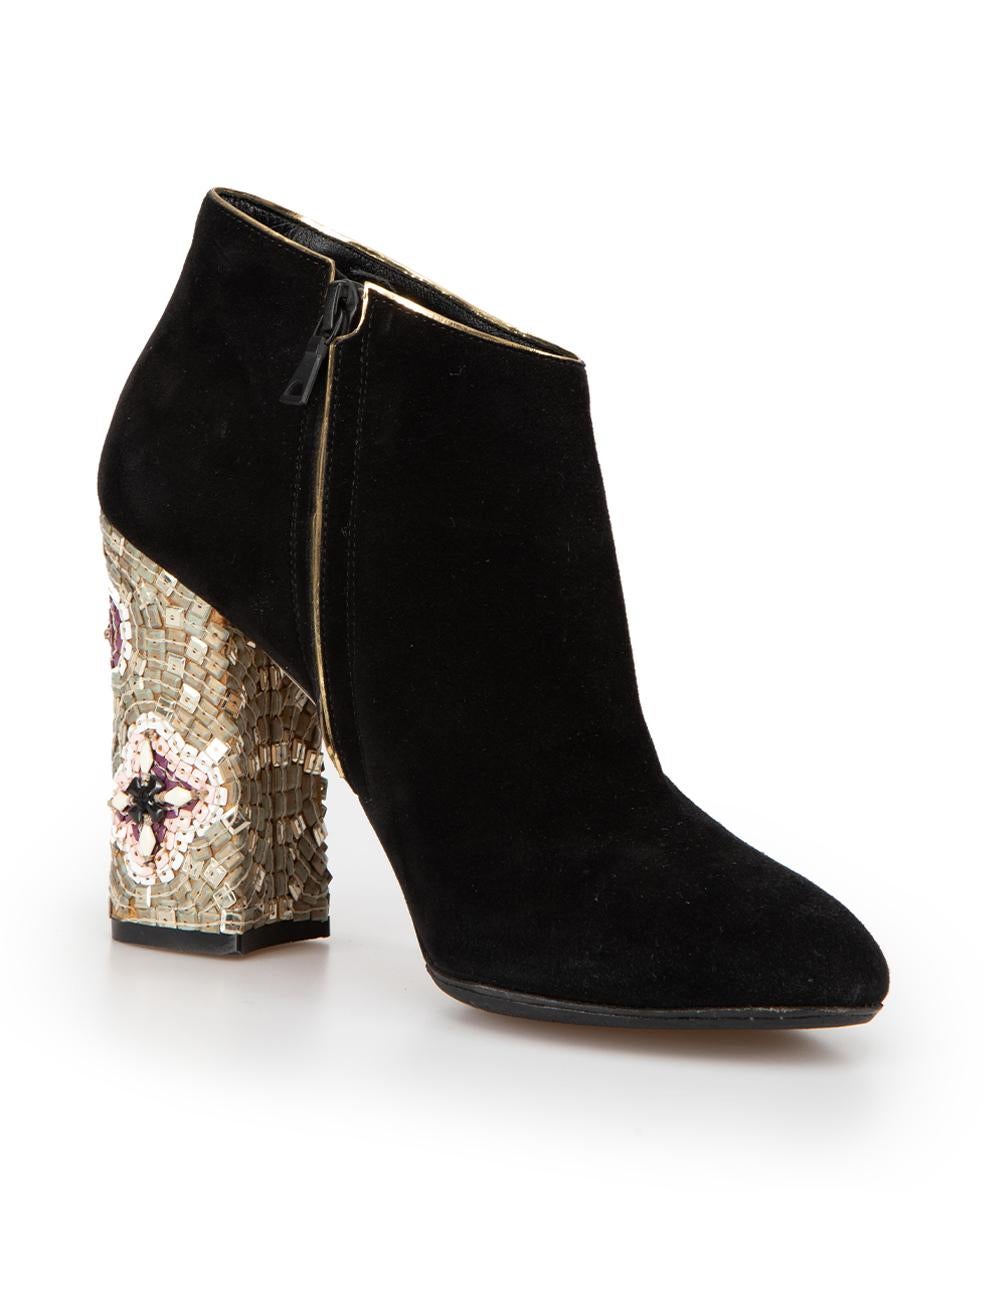 CONDITION is Very good. Minimal wear to boots is evident. Minimal wear to the suede exterior and the finish on the sequins has come off on this used Dolce & Gabbana designer resale item. Please note that these shoes have been